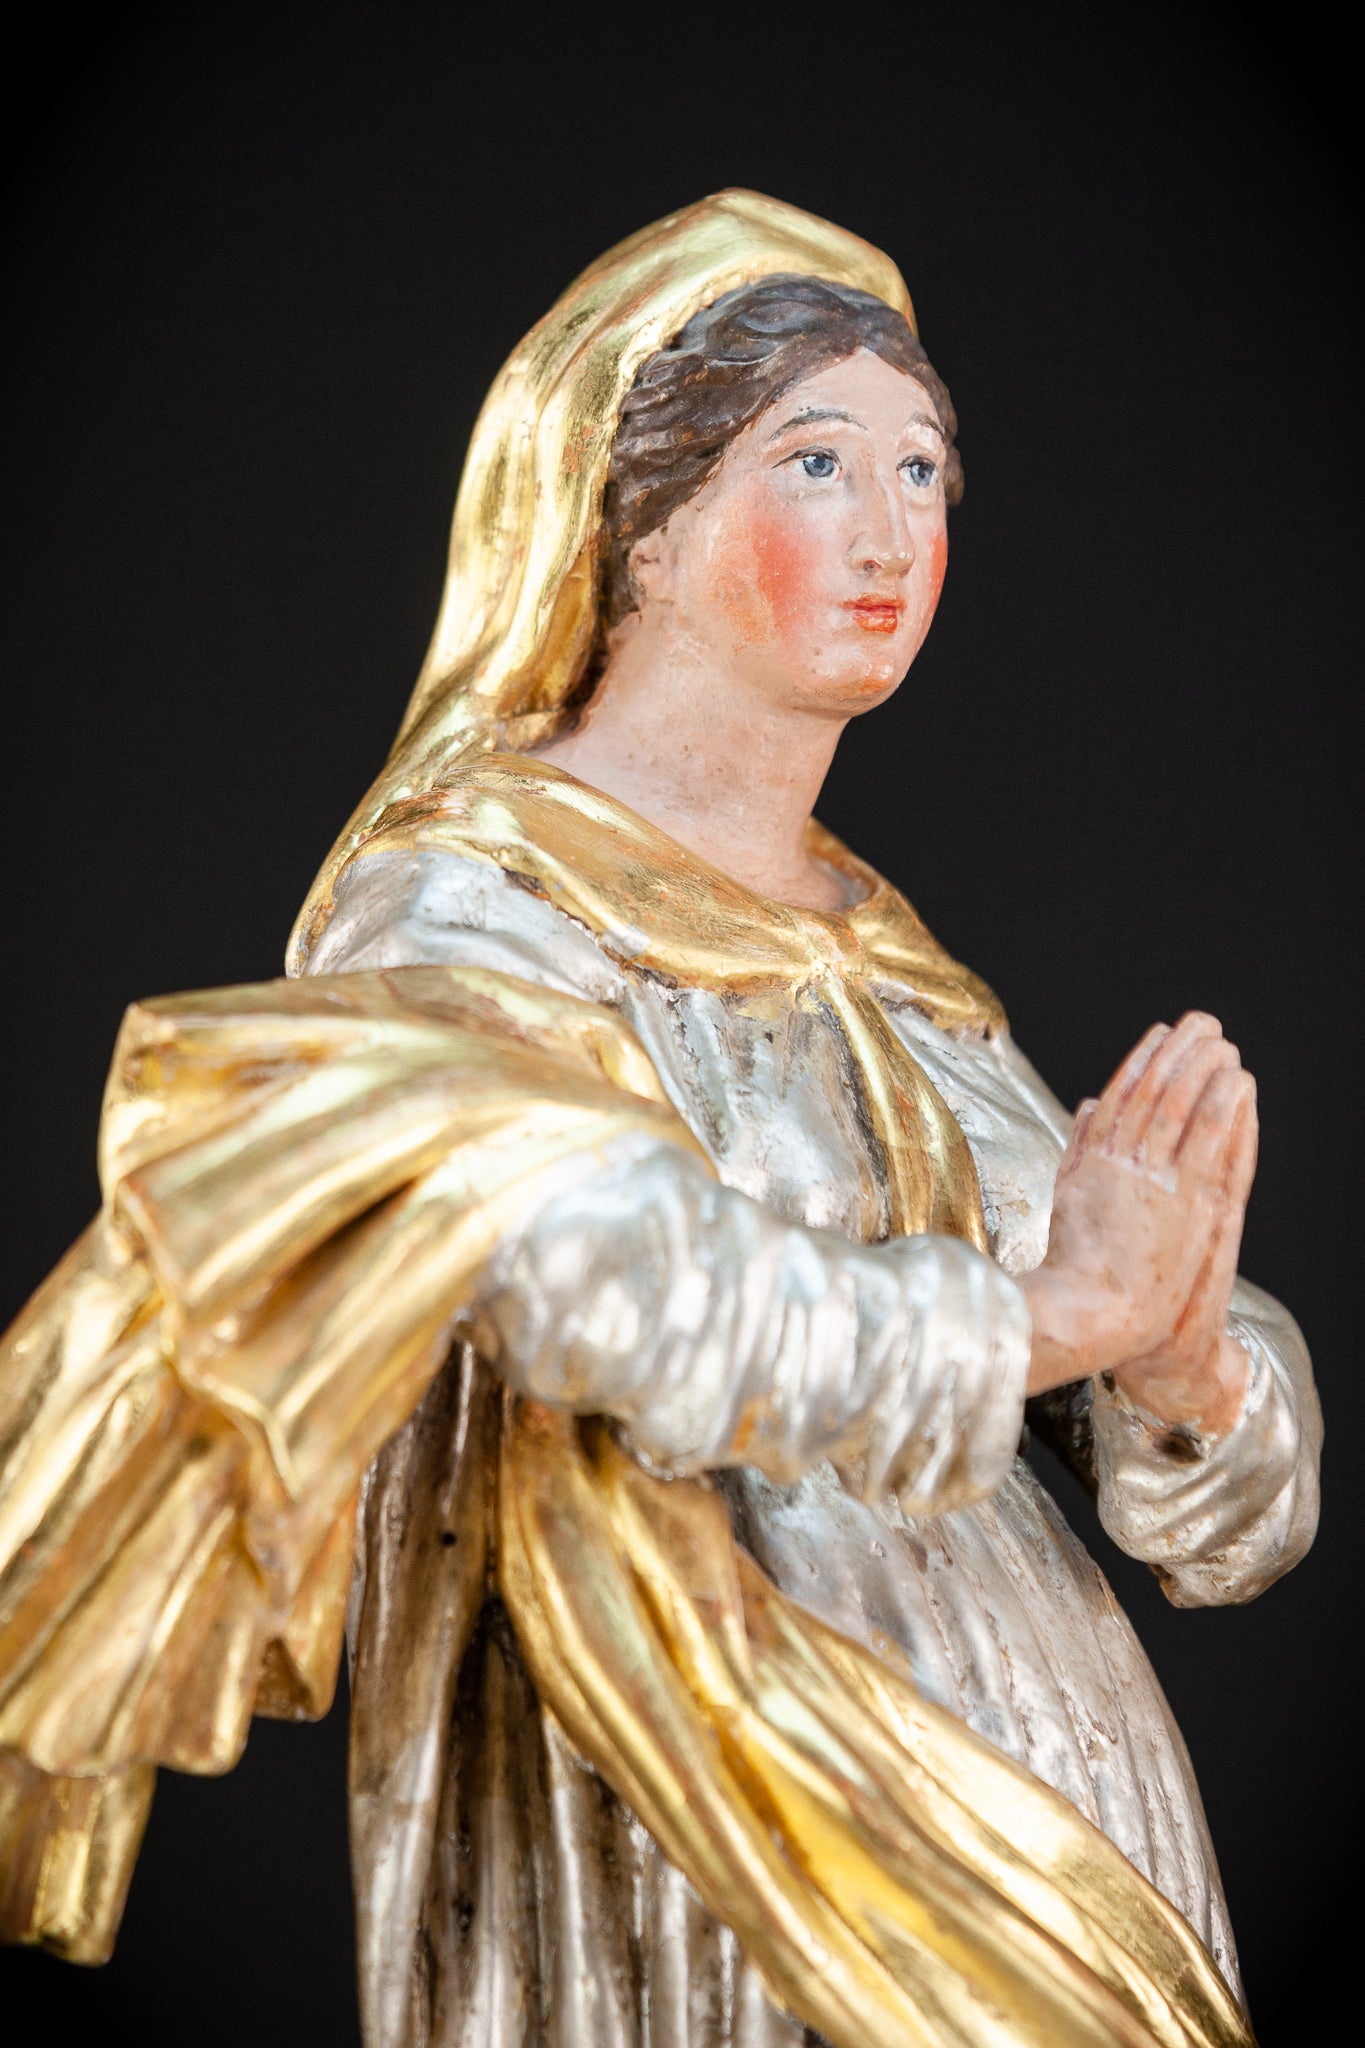 Immaculate Conception of Virgin Mary Wooden Sculpture | 1800s Antique 19.3” / 49 cm